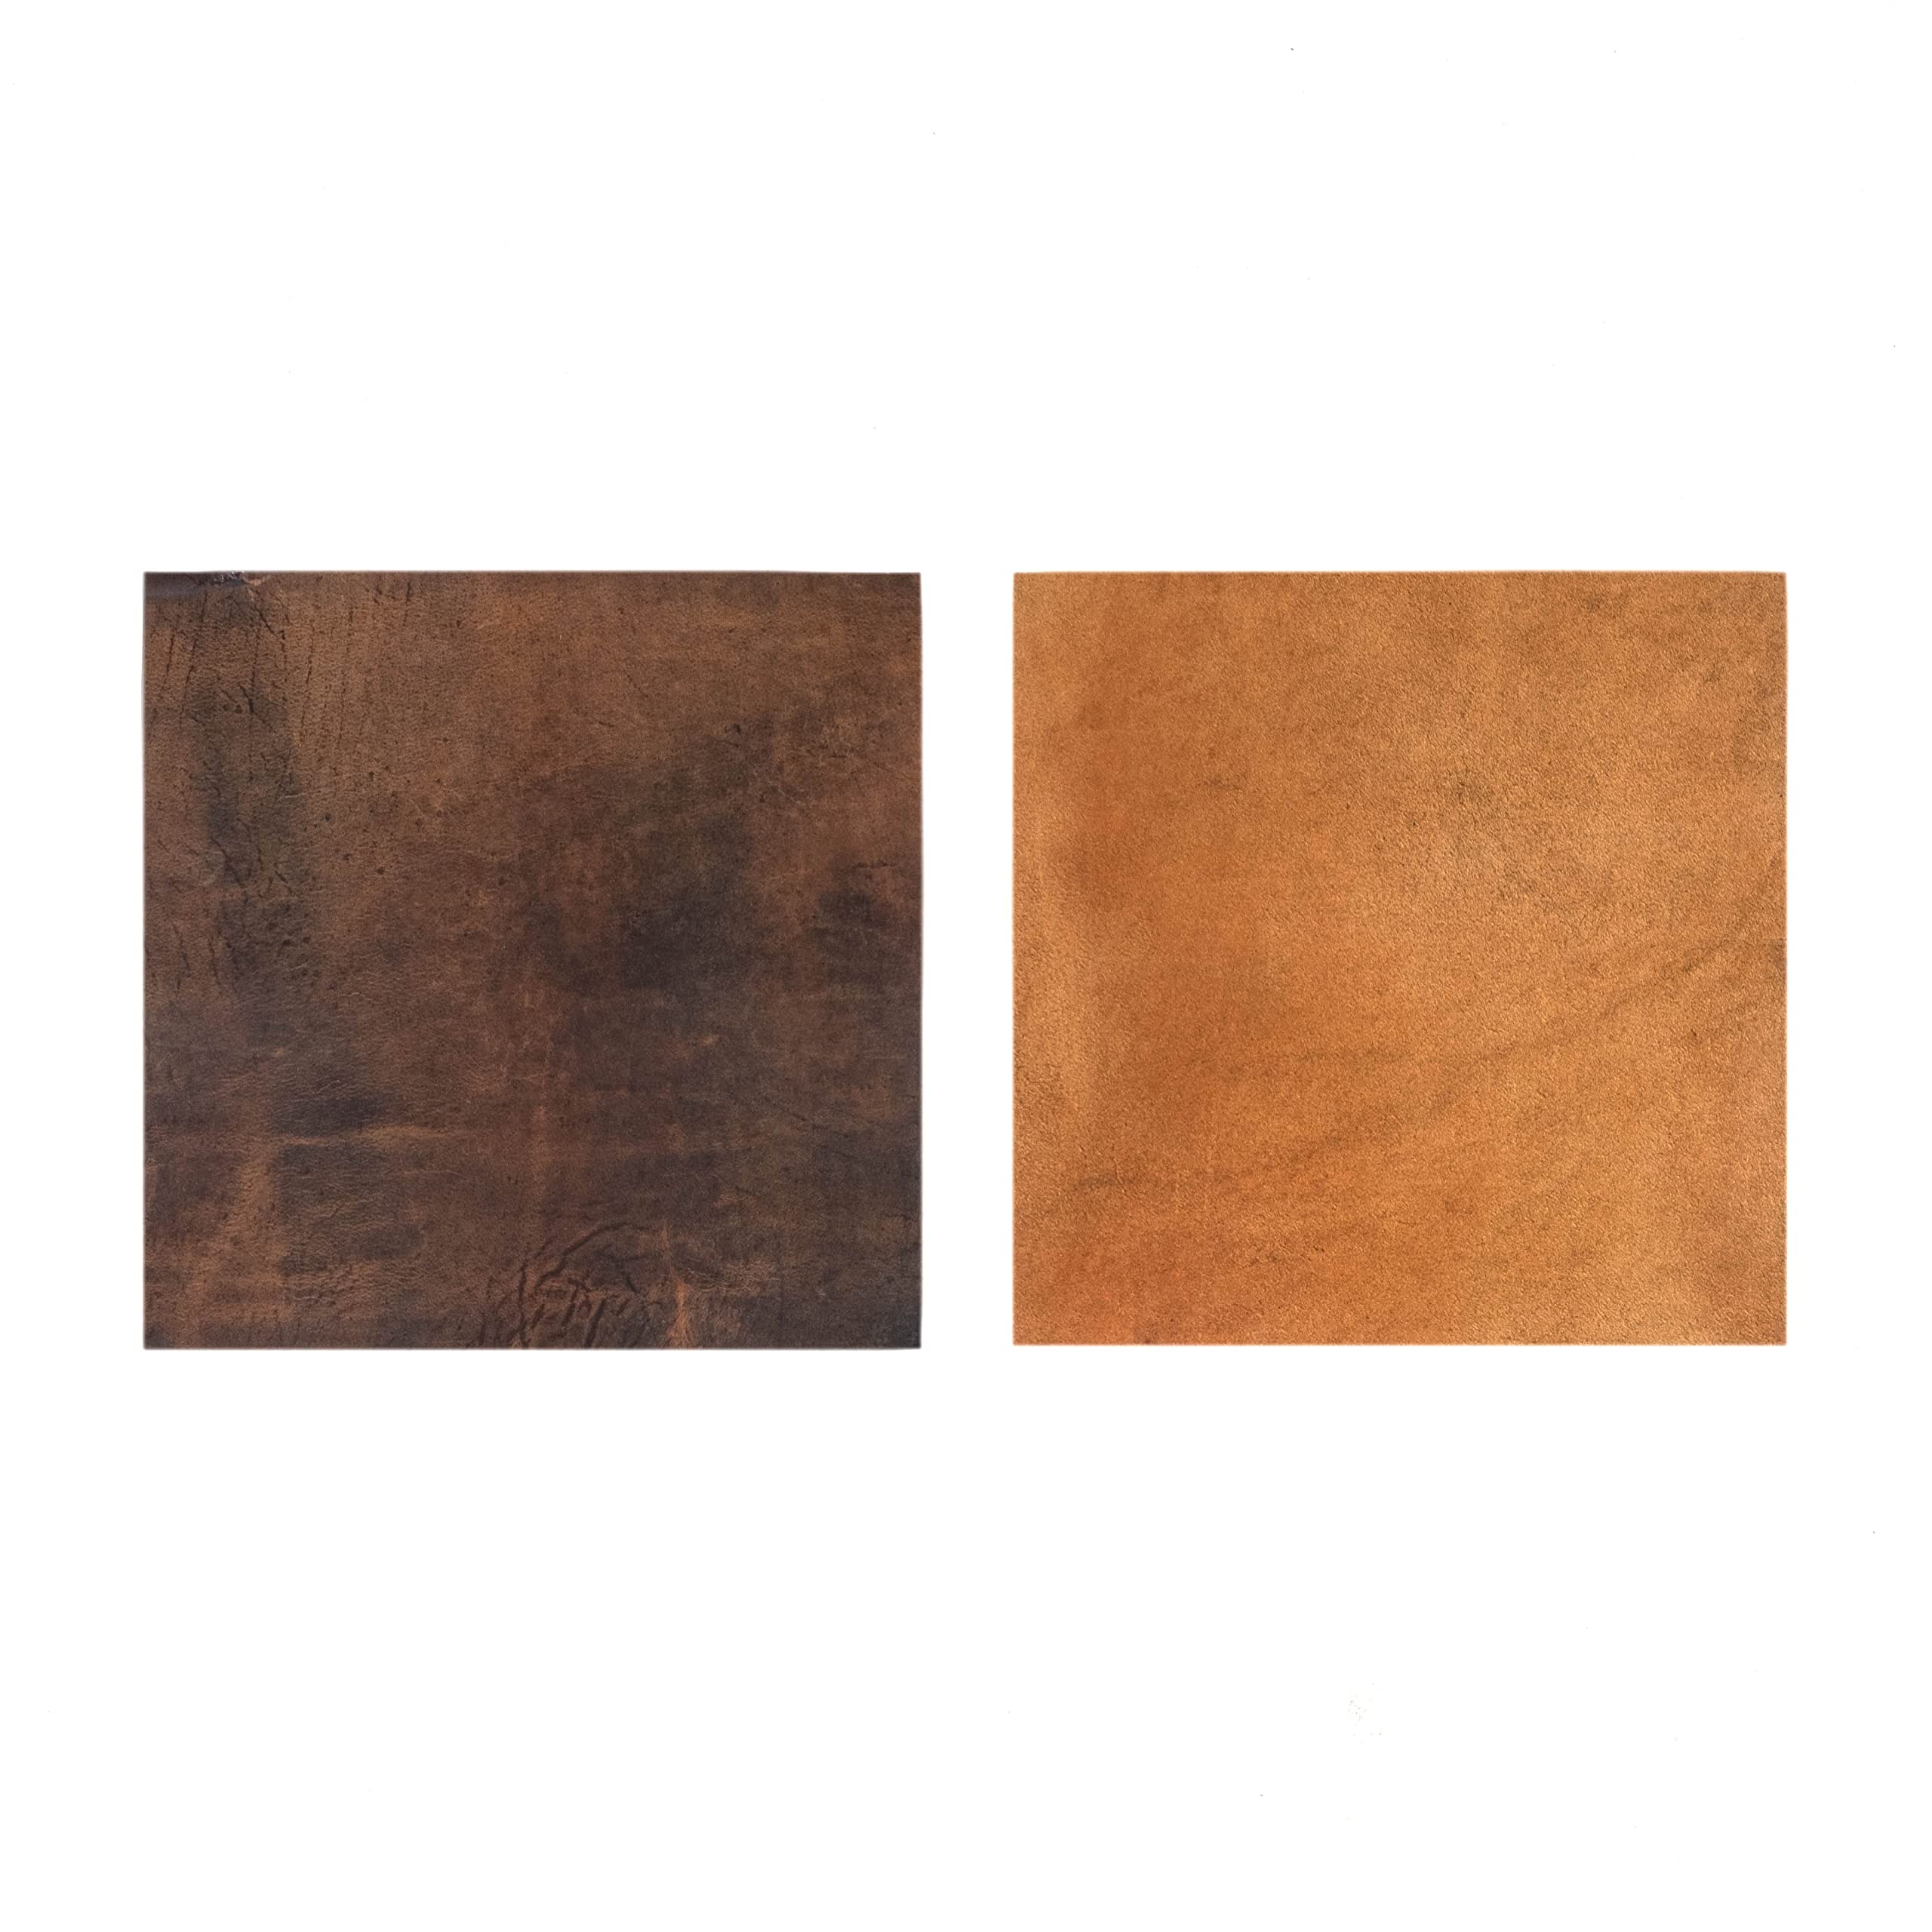 Genuine Leather Sheets Set of 4, Leather Material, Genuine Leather for Crafts | Leather Roll, Soft Leather, Sheet Leather for Crafts | Quality Raw Leather 12" x 12" + 36" Leather Cord